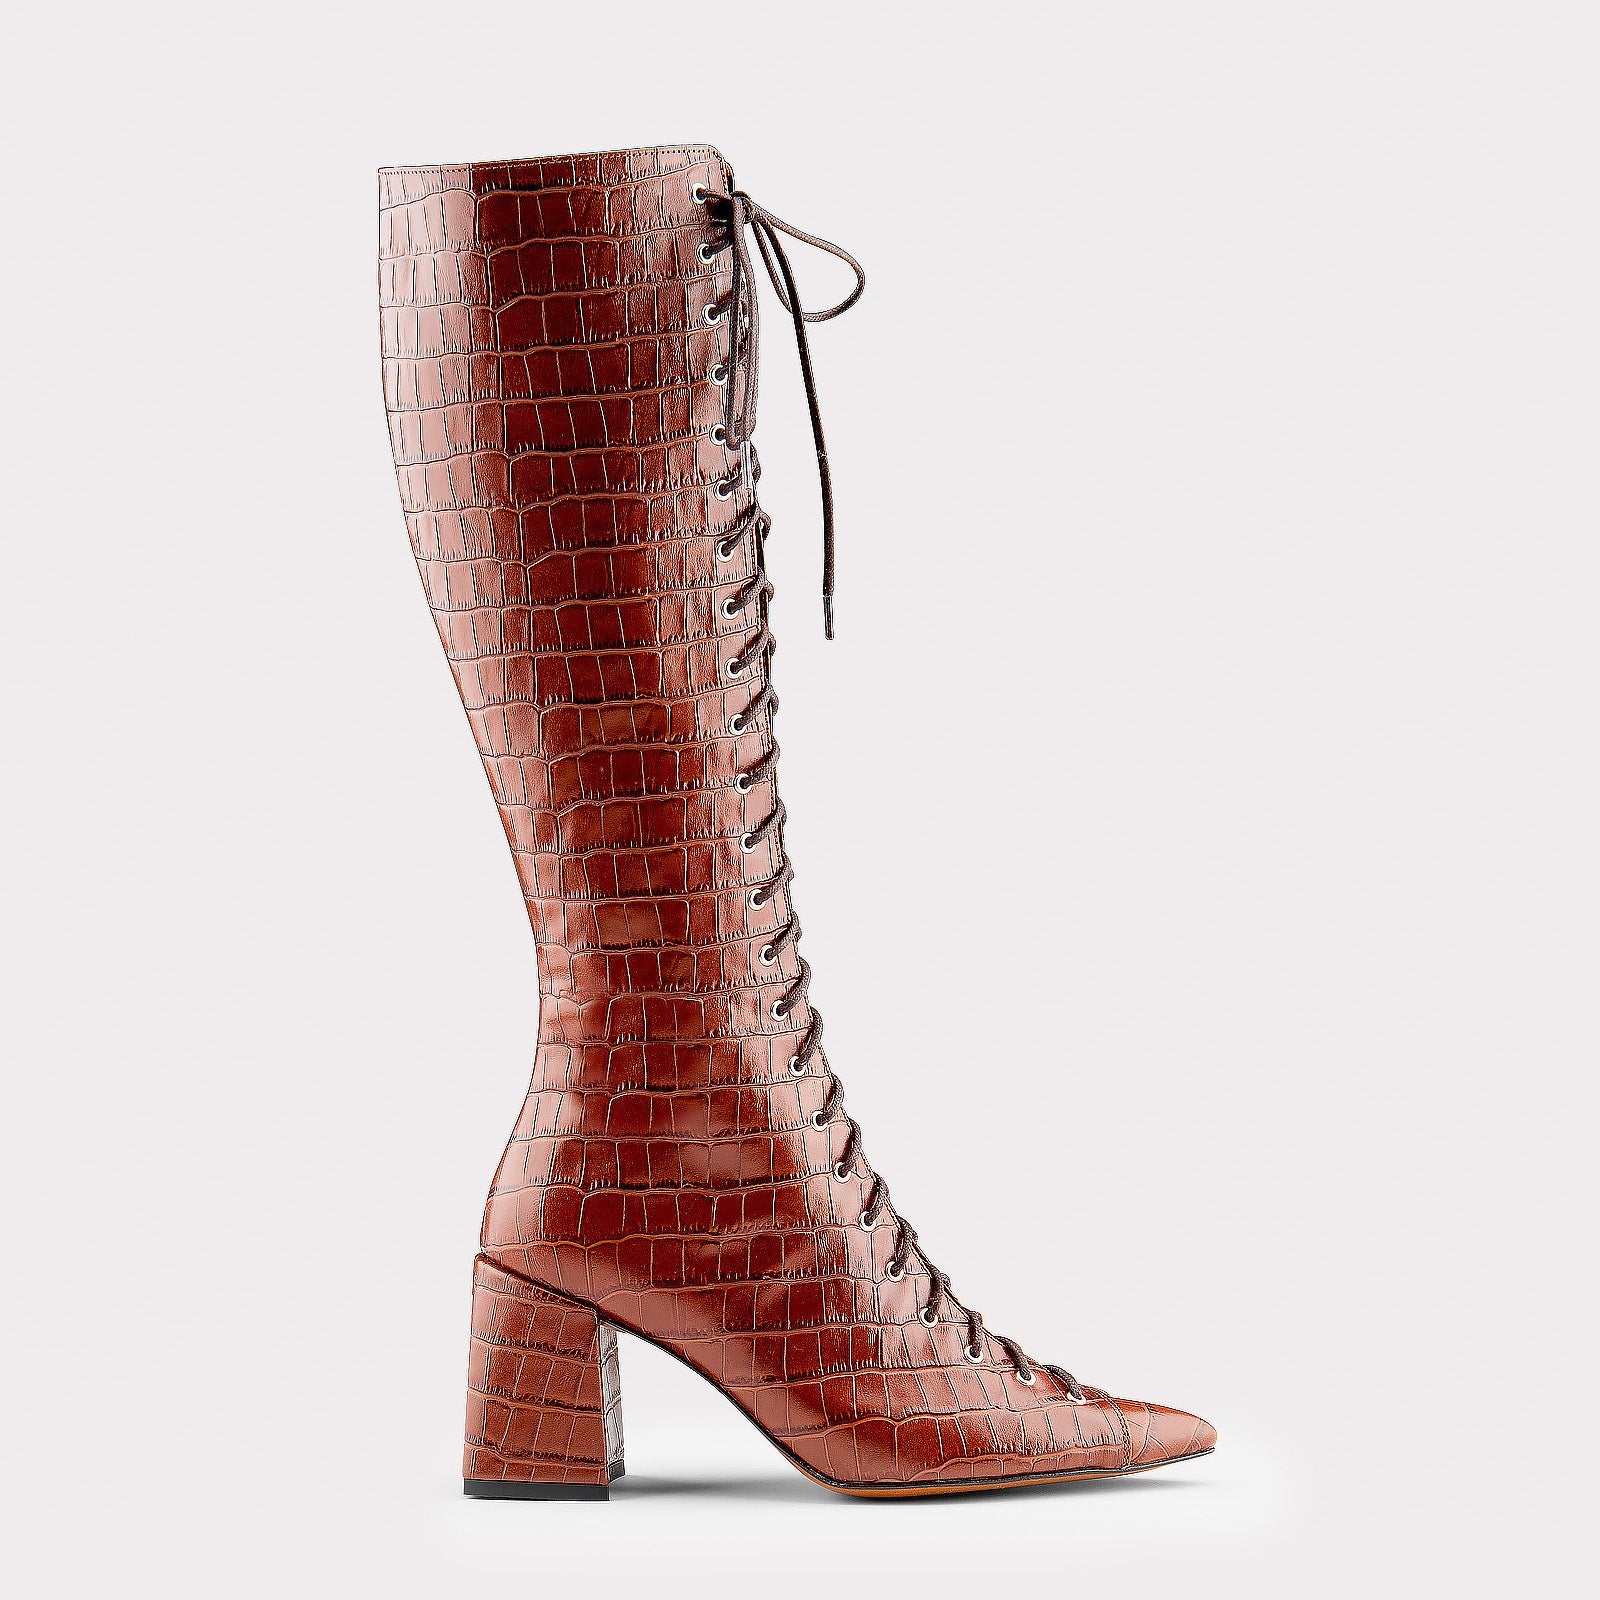 TEXTURED LEATHER BOOTS MONICA BROWN